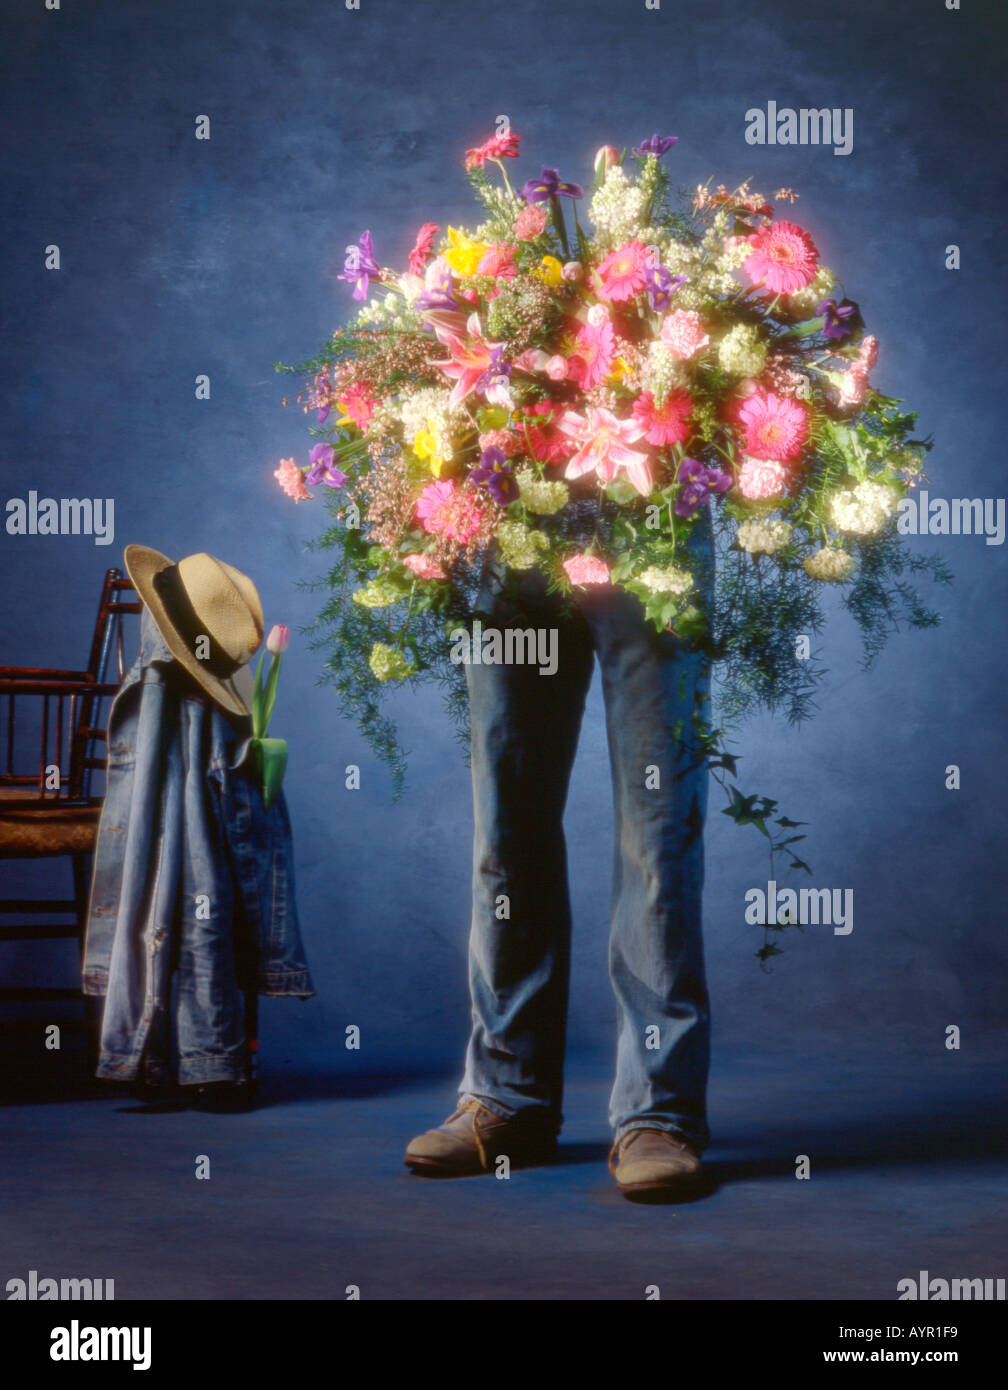 Blue jeans and boots used as a planter for floweral bouquet Stock Photo